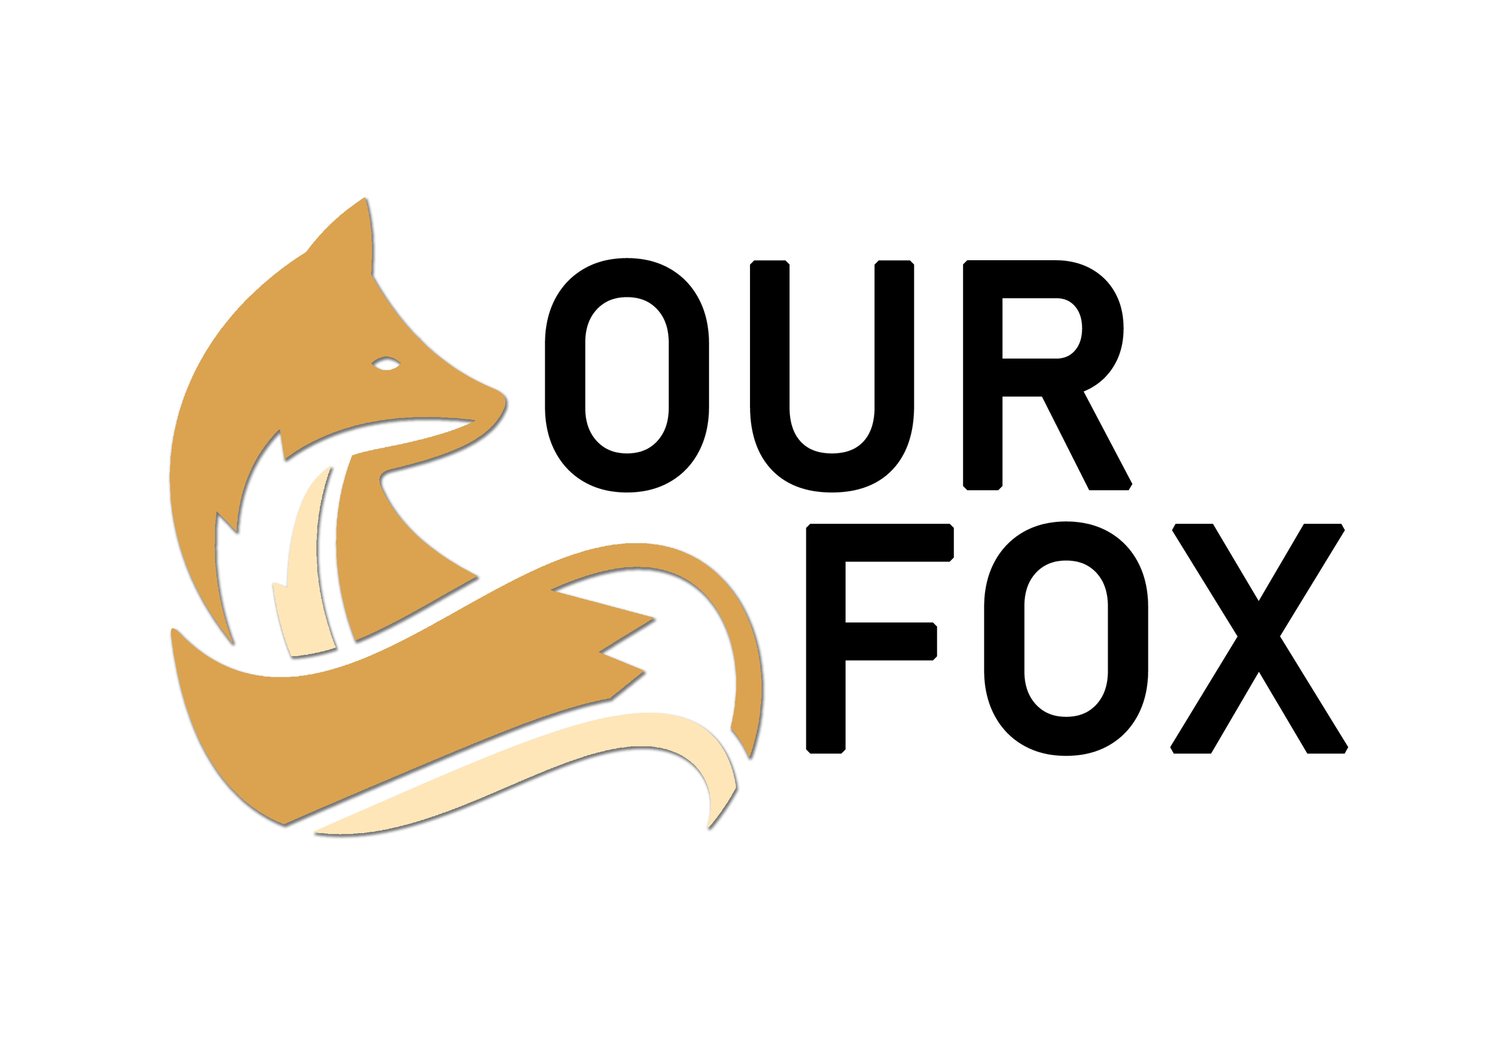 SAVE OUR FOX